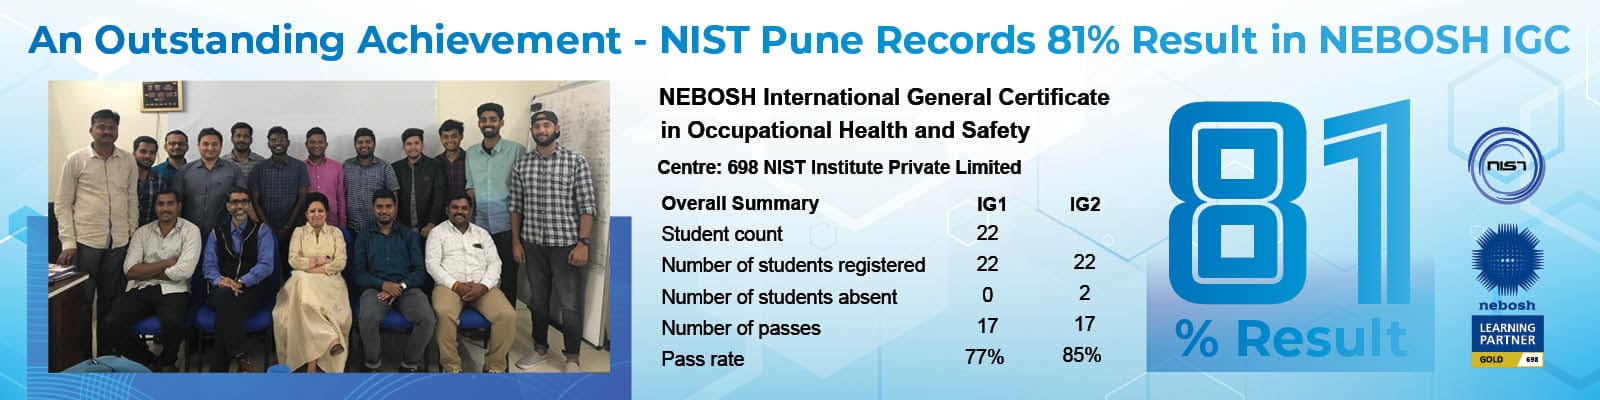 nist-pune-achieves-an-outstanding-81-result-in-nebosh-igc